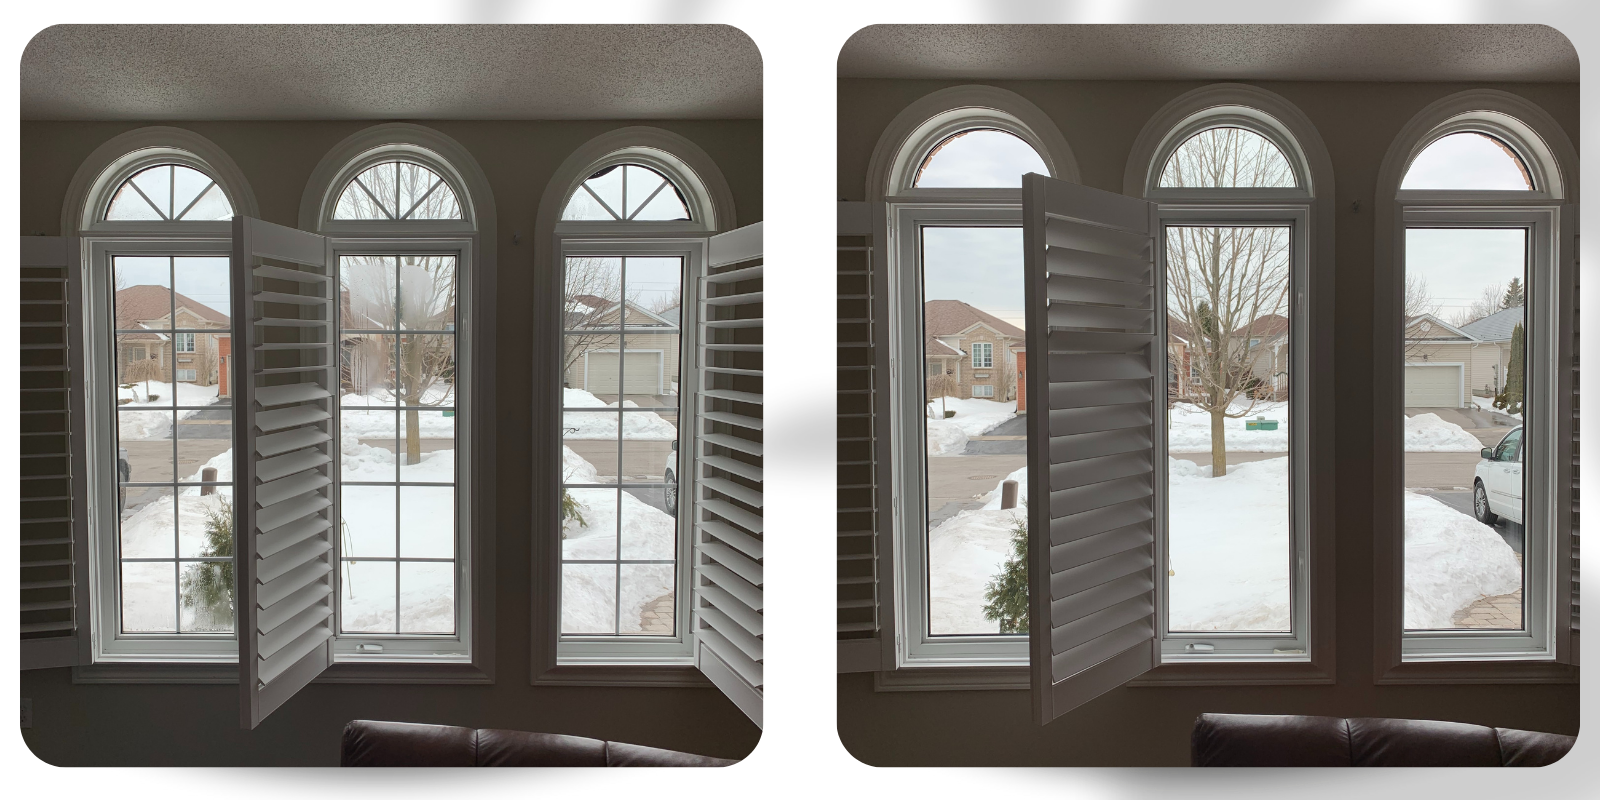 Change your view and increase your home value with glass replacement